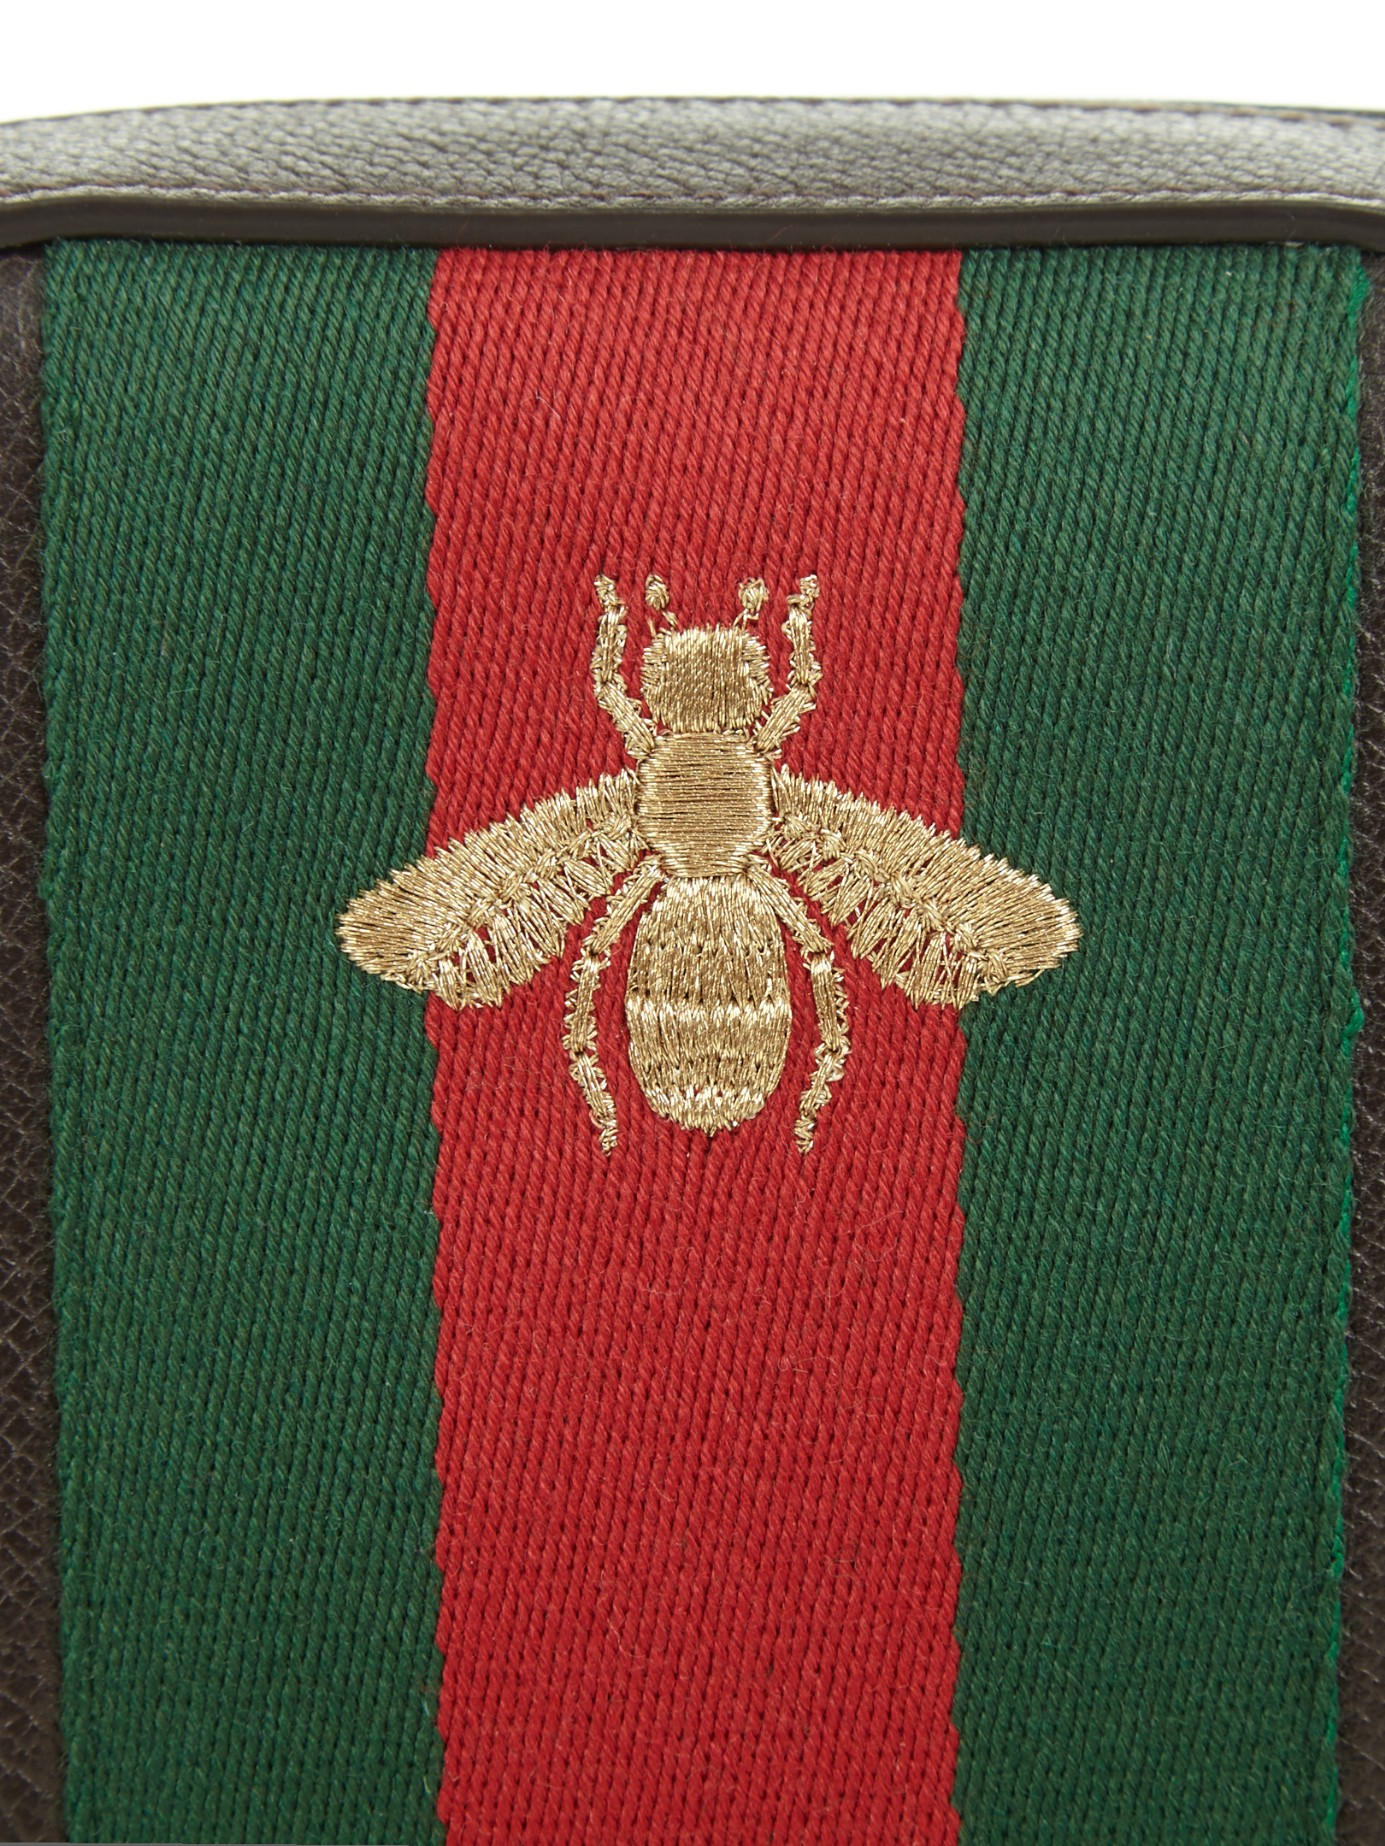 gucci embroidered bee